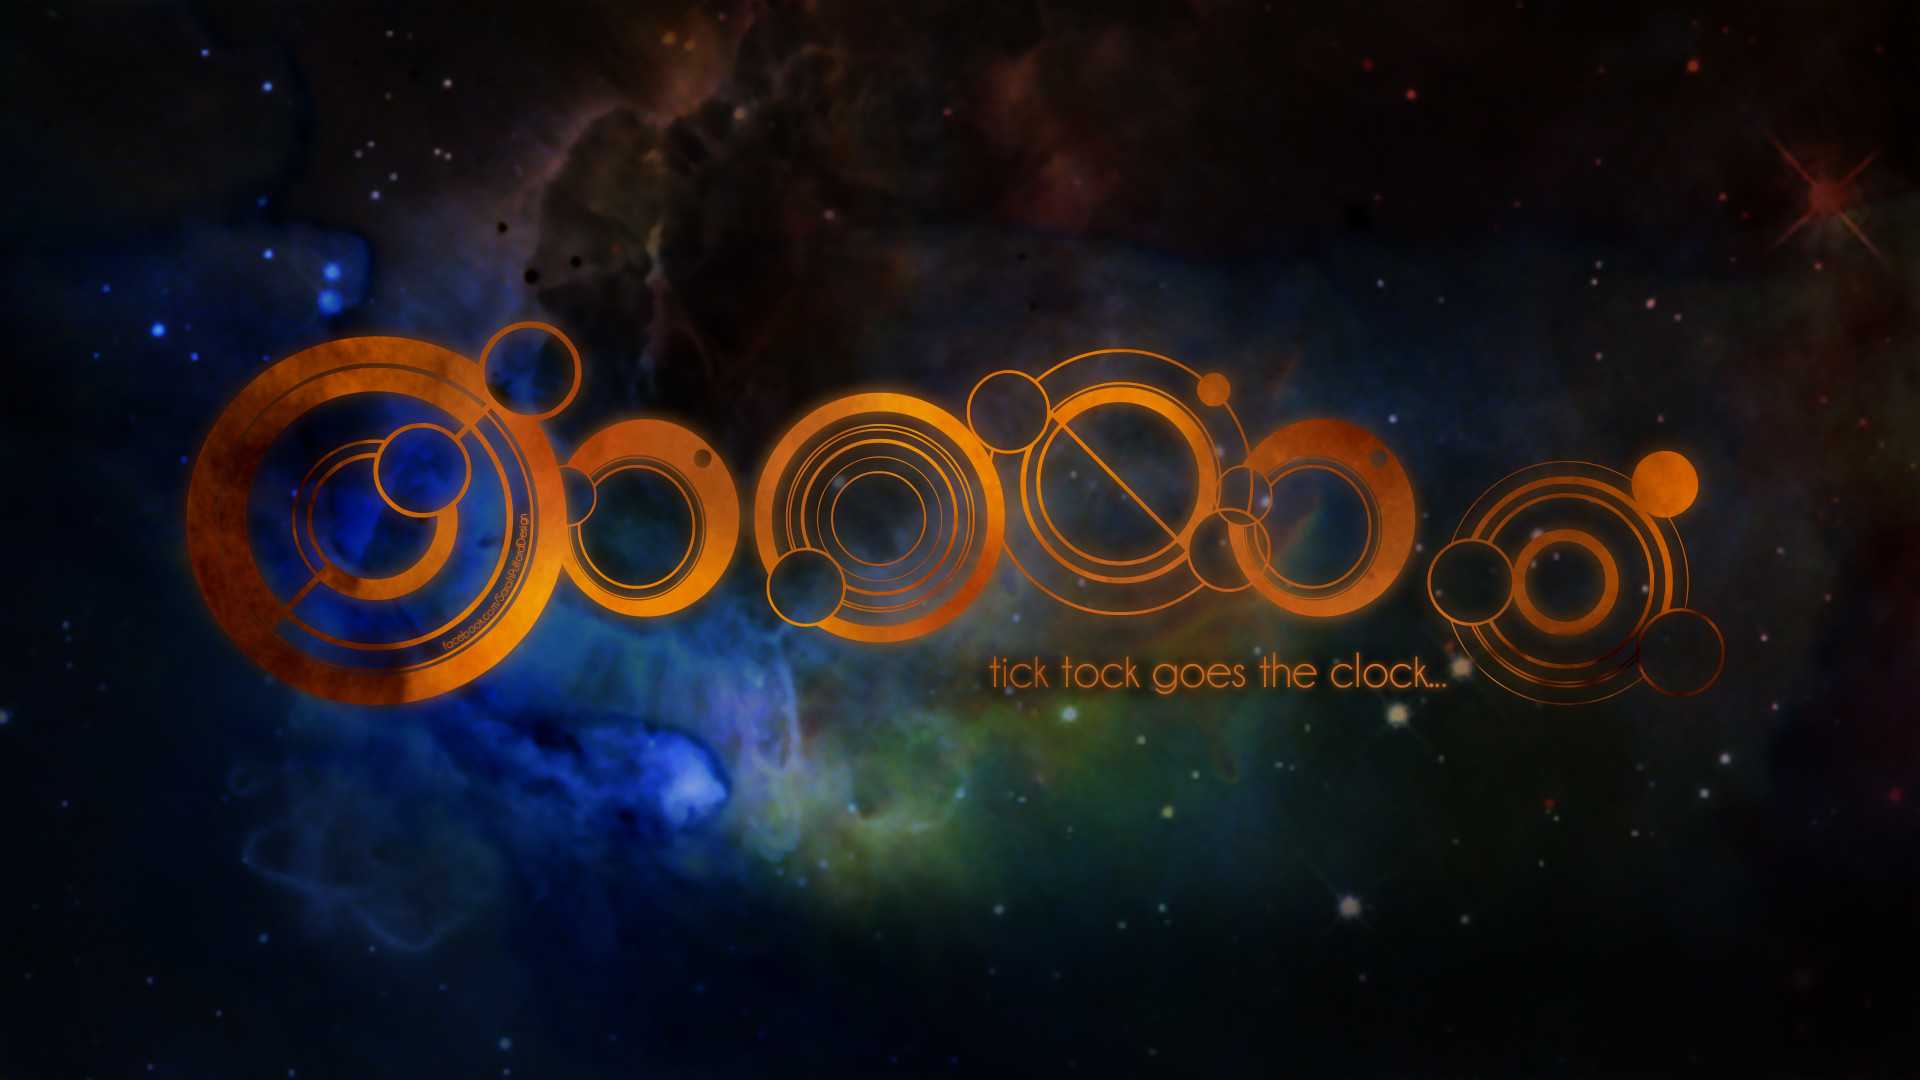 Doctor Who HD Wallpaper Full And Background Image Id For Desktop